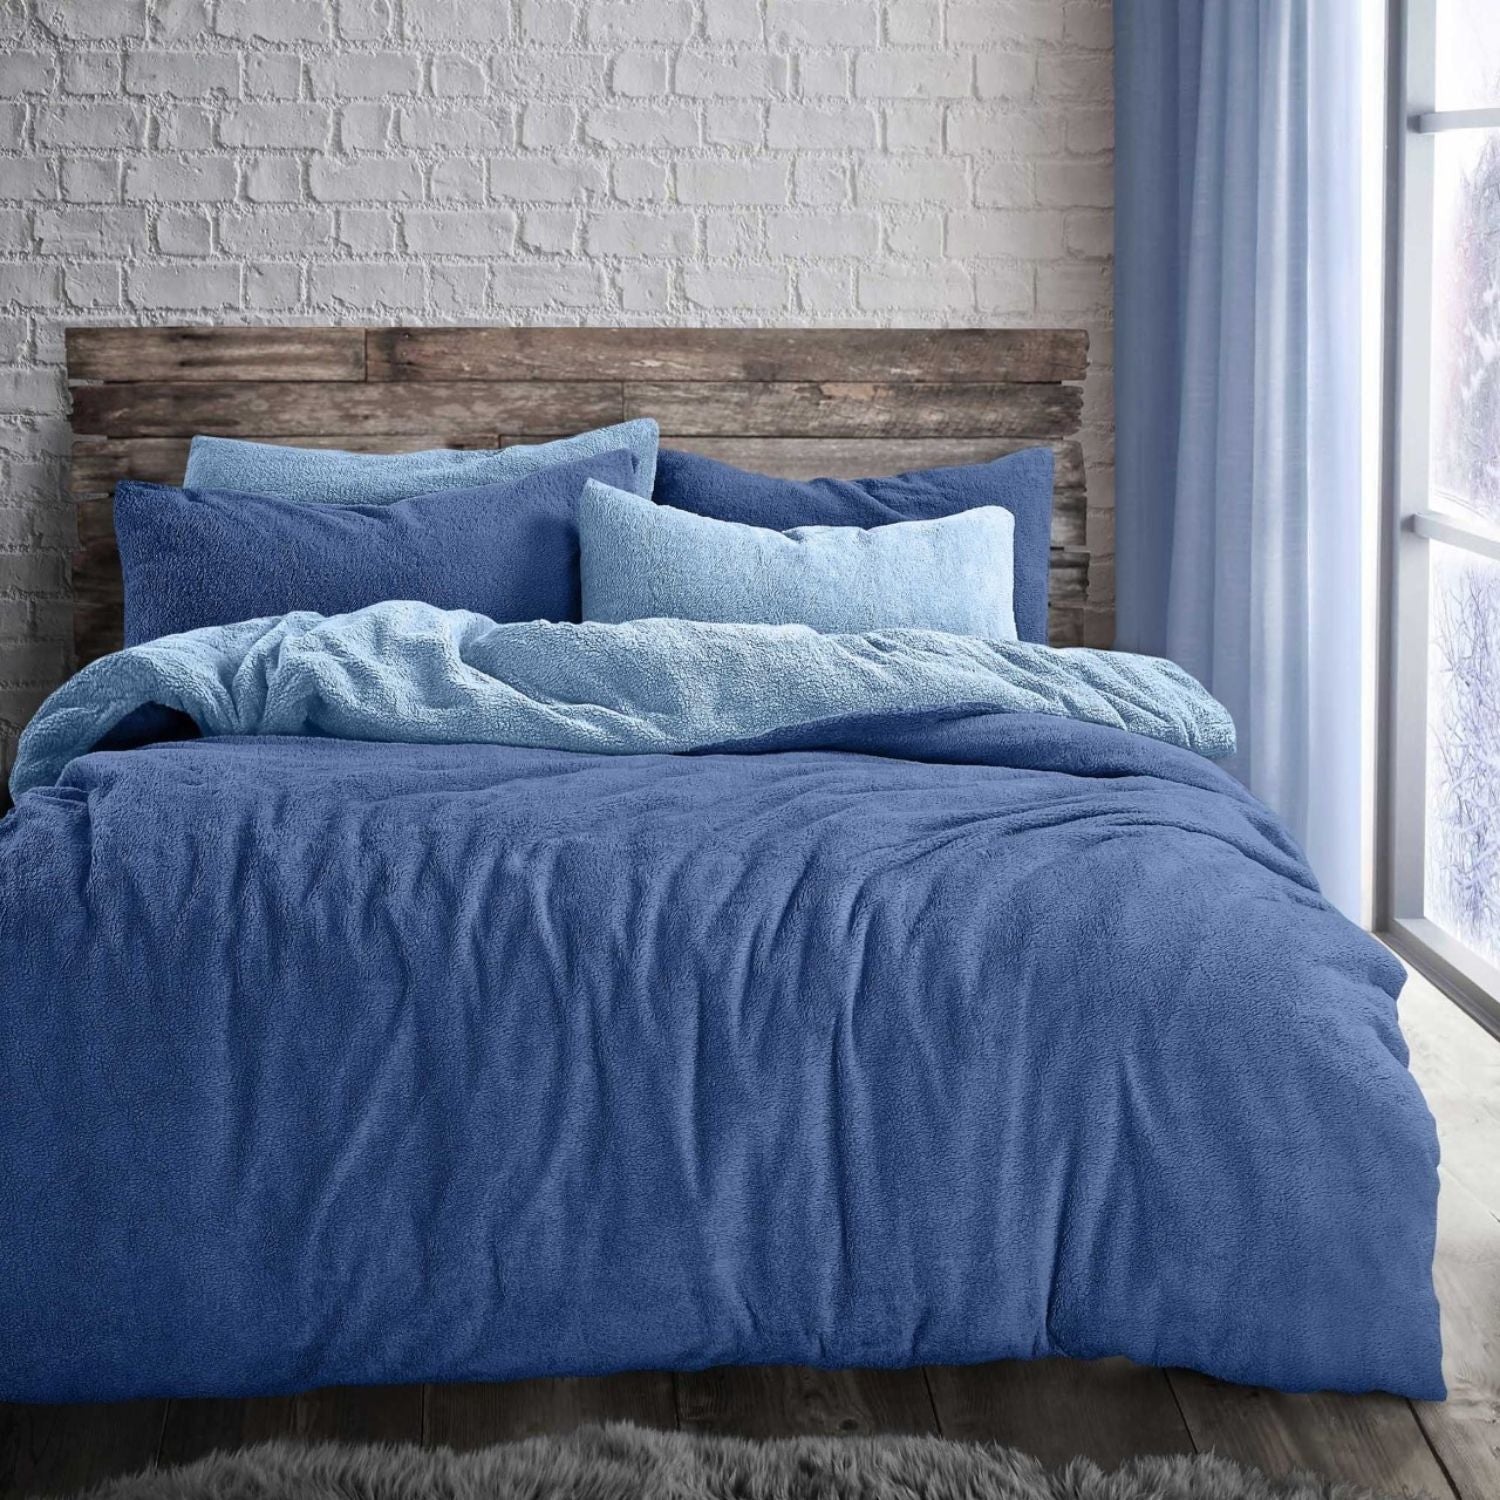  The Home Bedroom Teddy Duvet Set - Reversible Navy on Blue 1 Shaws Department Stores